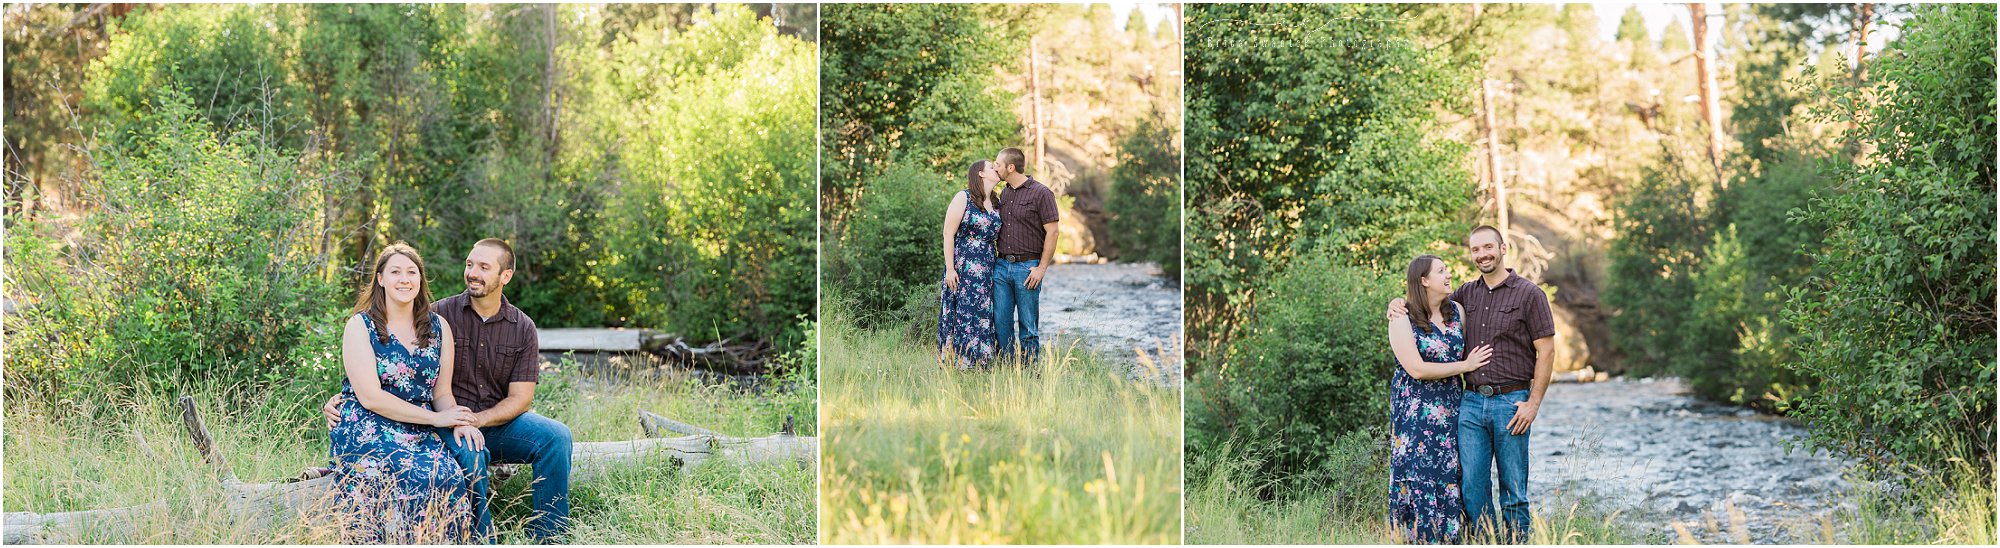 Tumalo Creek flowing through Shevlin Park is always a favorite place in the summer for engagement photos! | Erica Swantek Photography